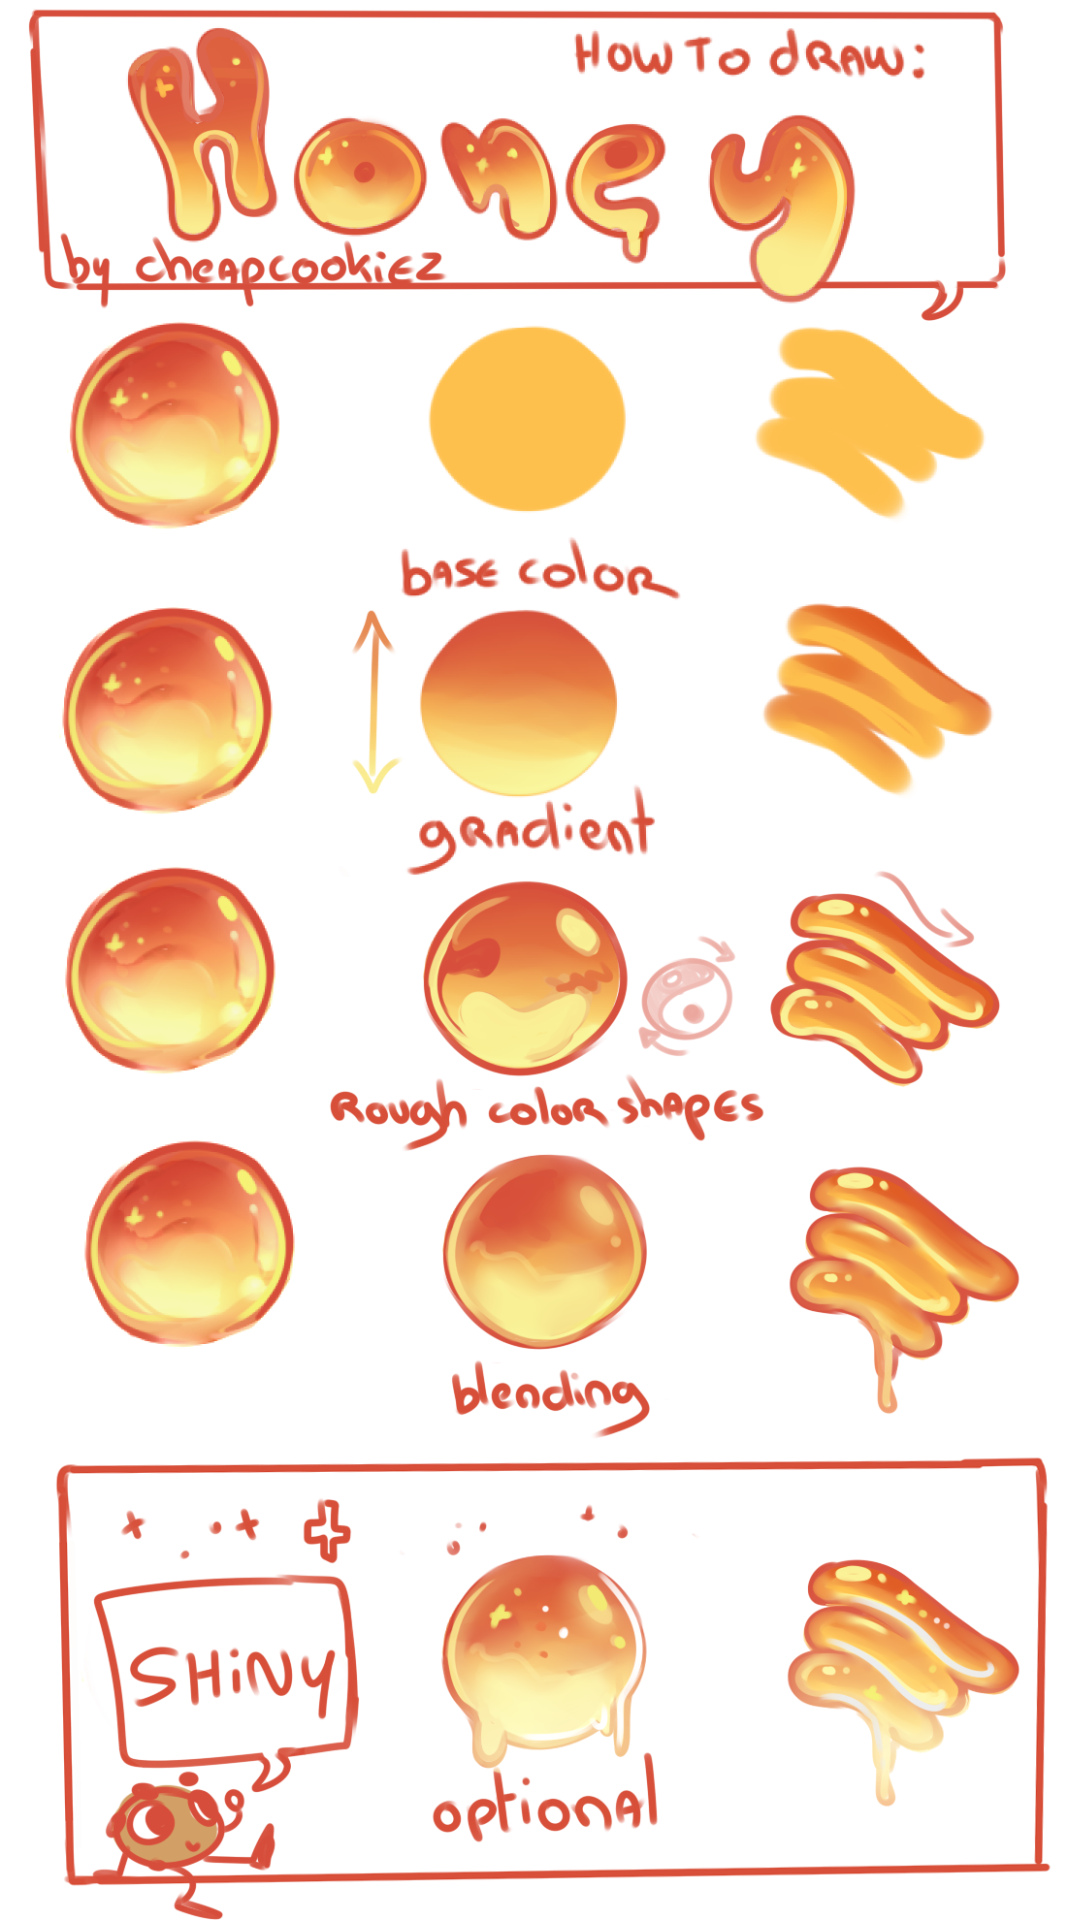 expensivebrowniez: *(*´∀｀*)☆ - How to draw honey/shiny stuff :  __________________